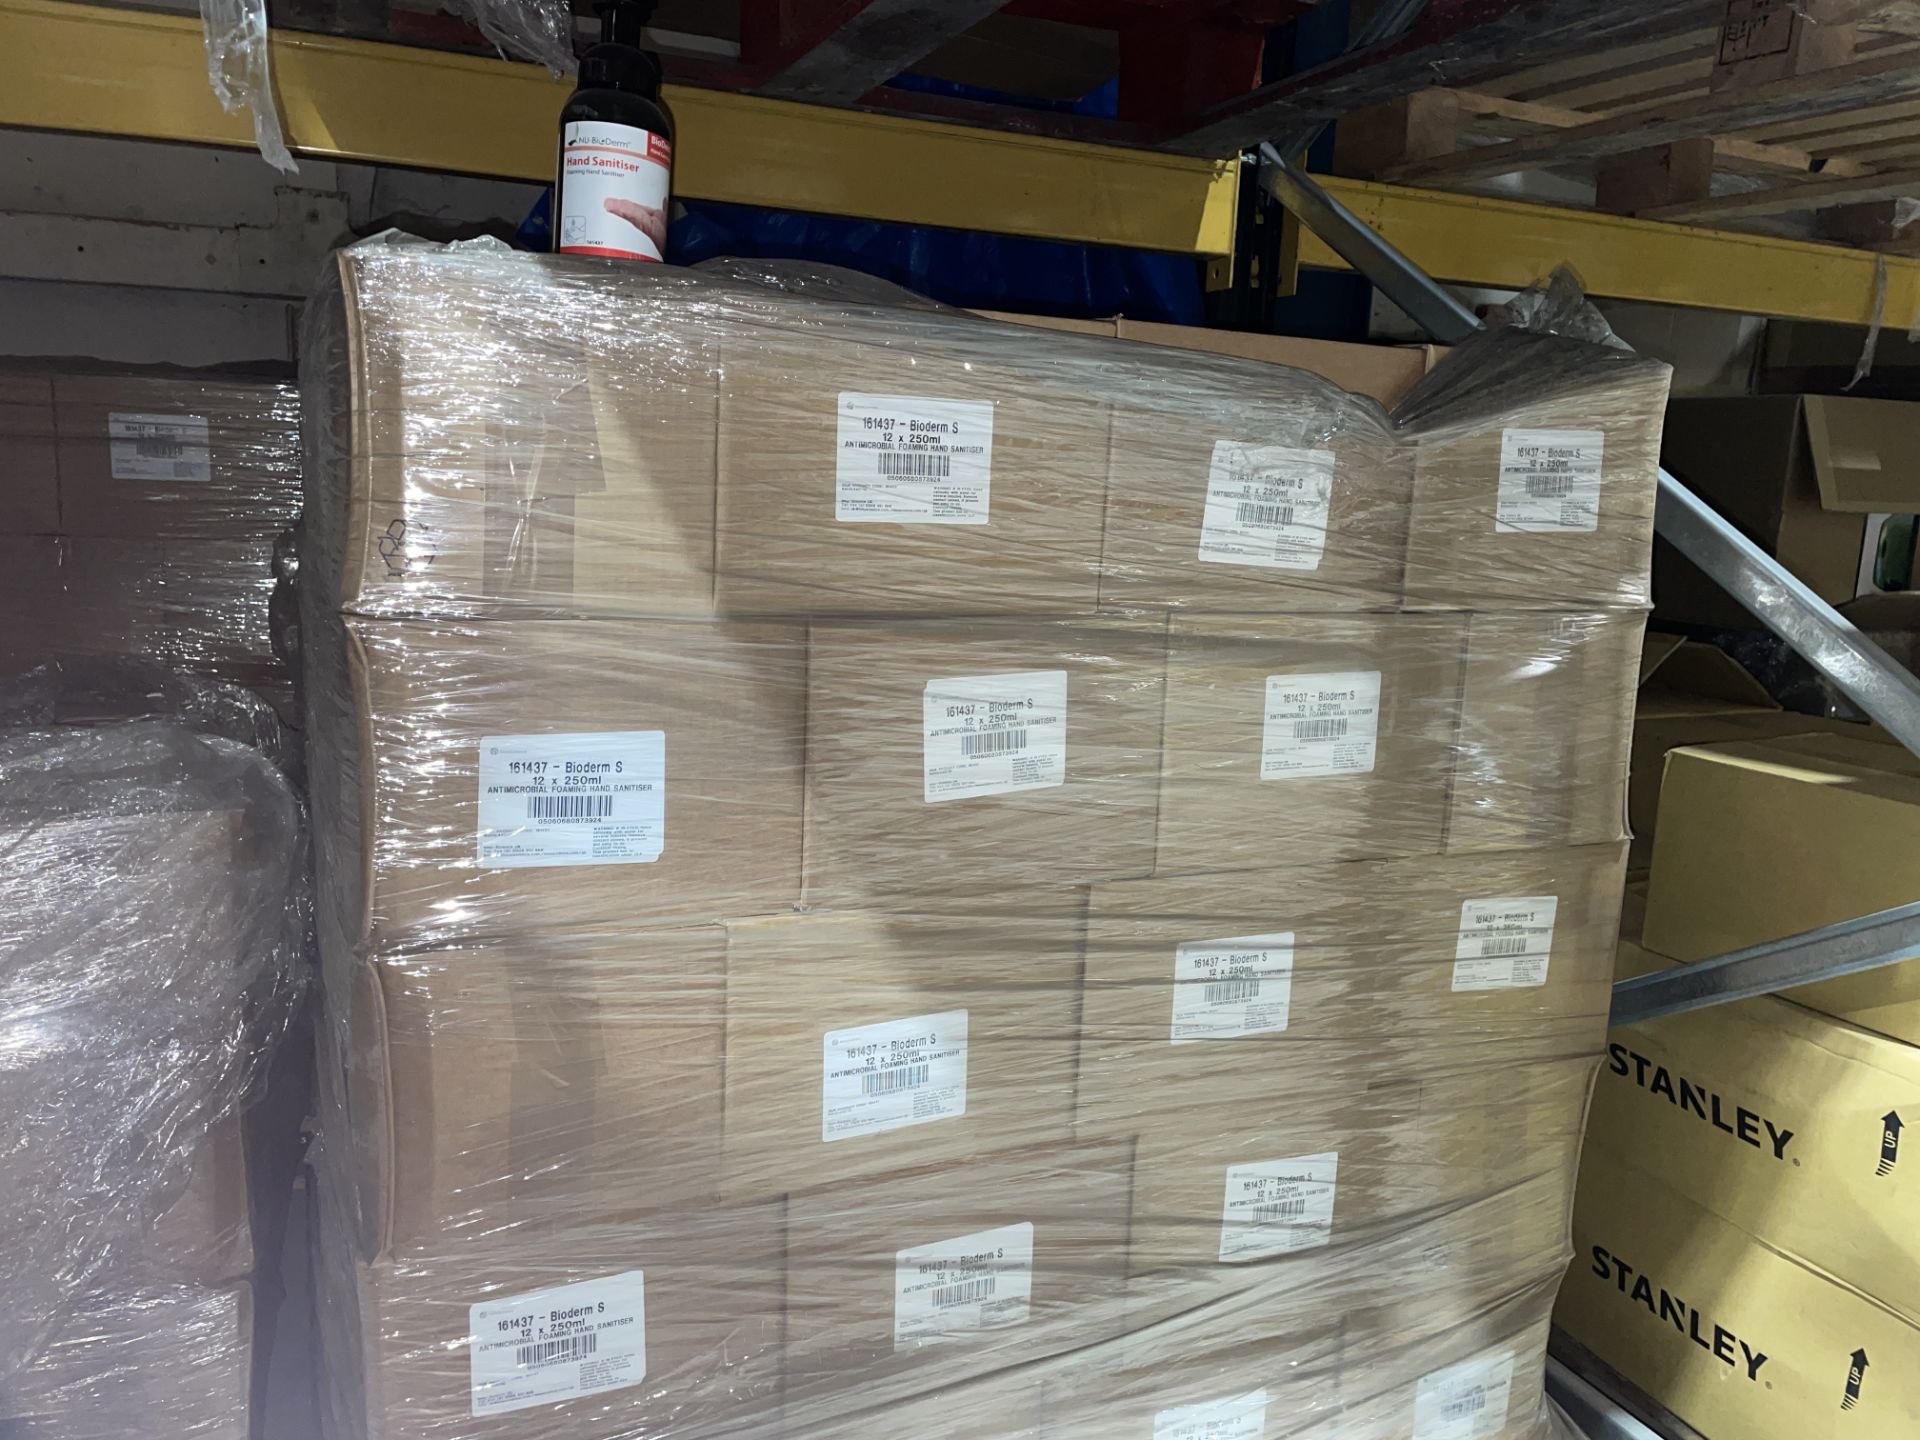 PALLET TO CONTAIN A LARGE QUANTITY OF NU BIODERM 500ML FOAMING HAND SANITISER LYR